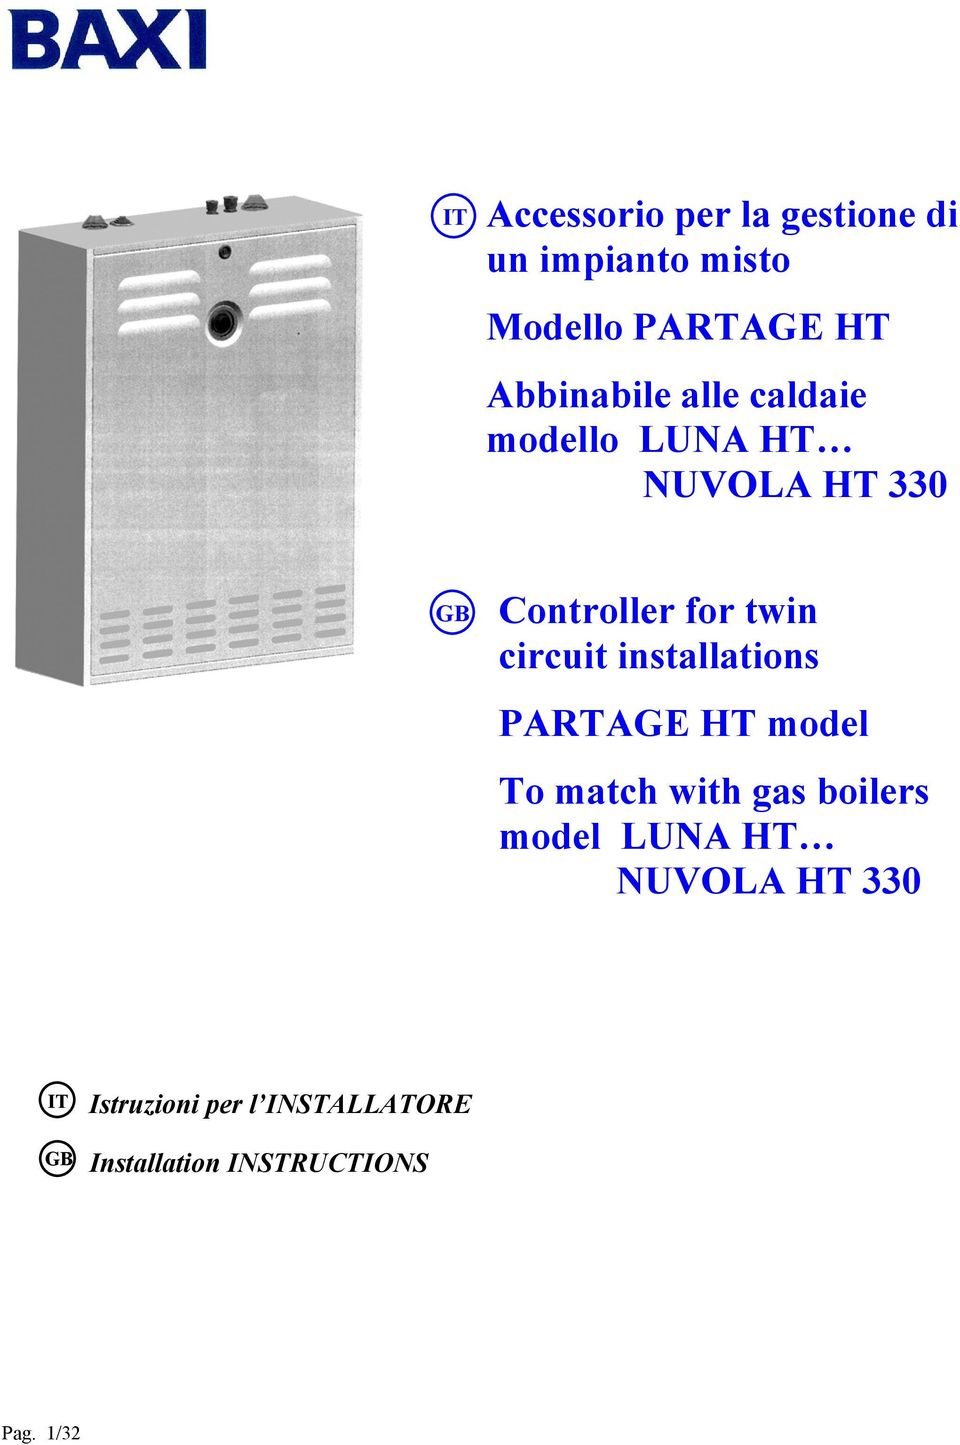 circuit installations PARTAGE HT model To match with gas boilers model LUNA